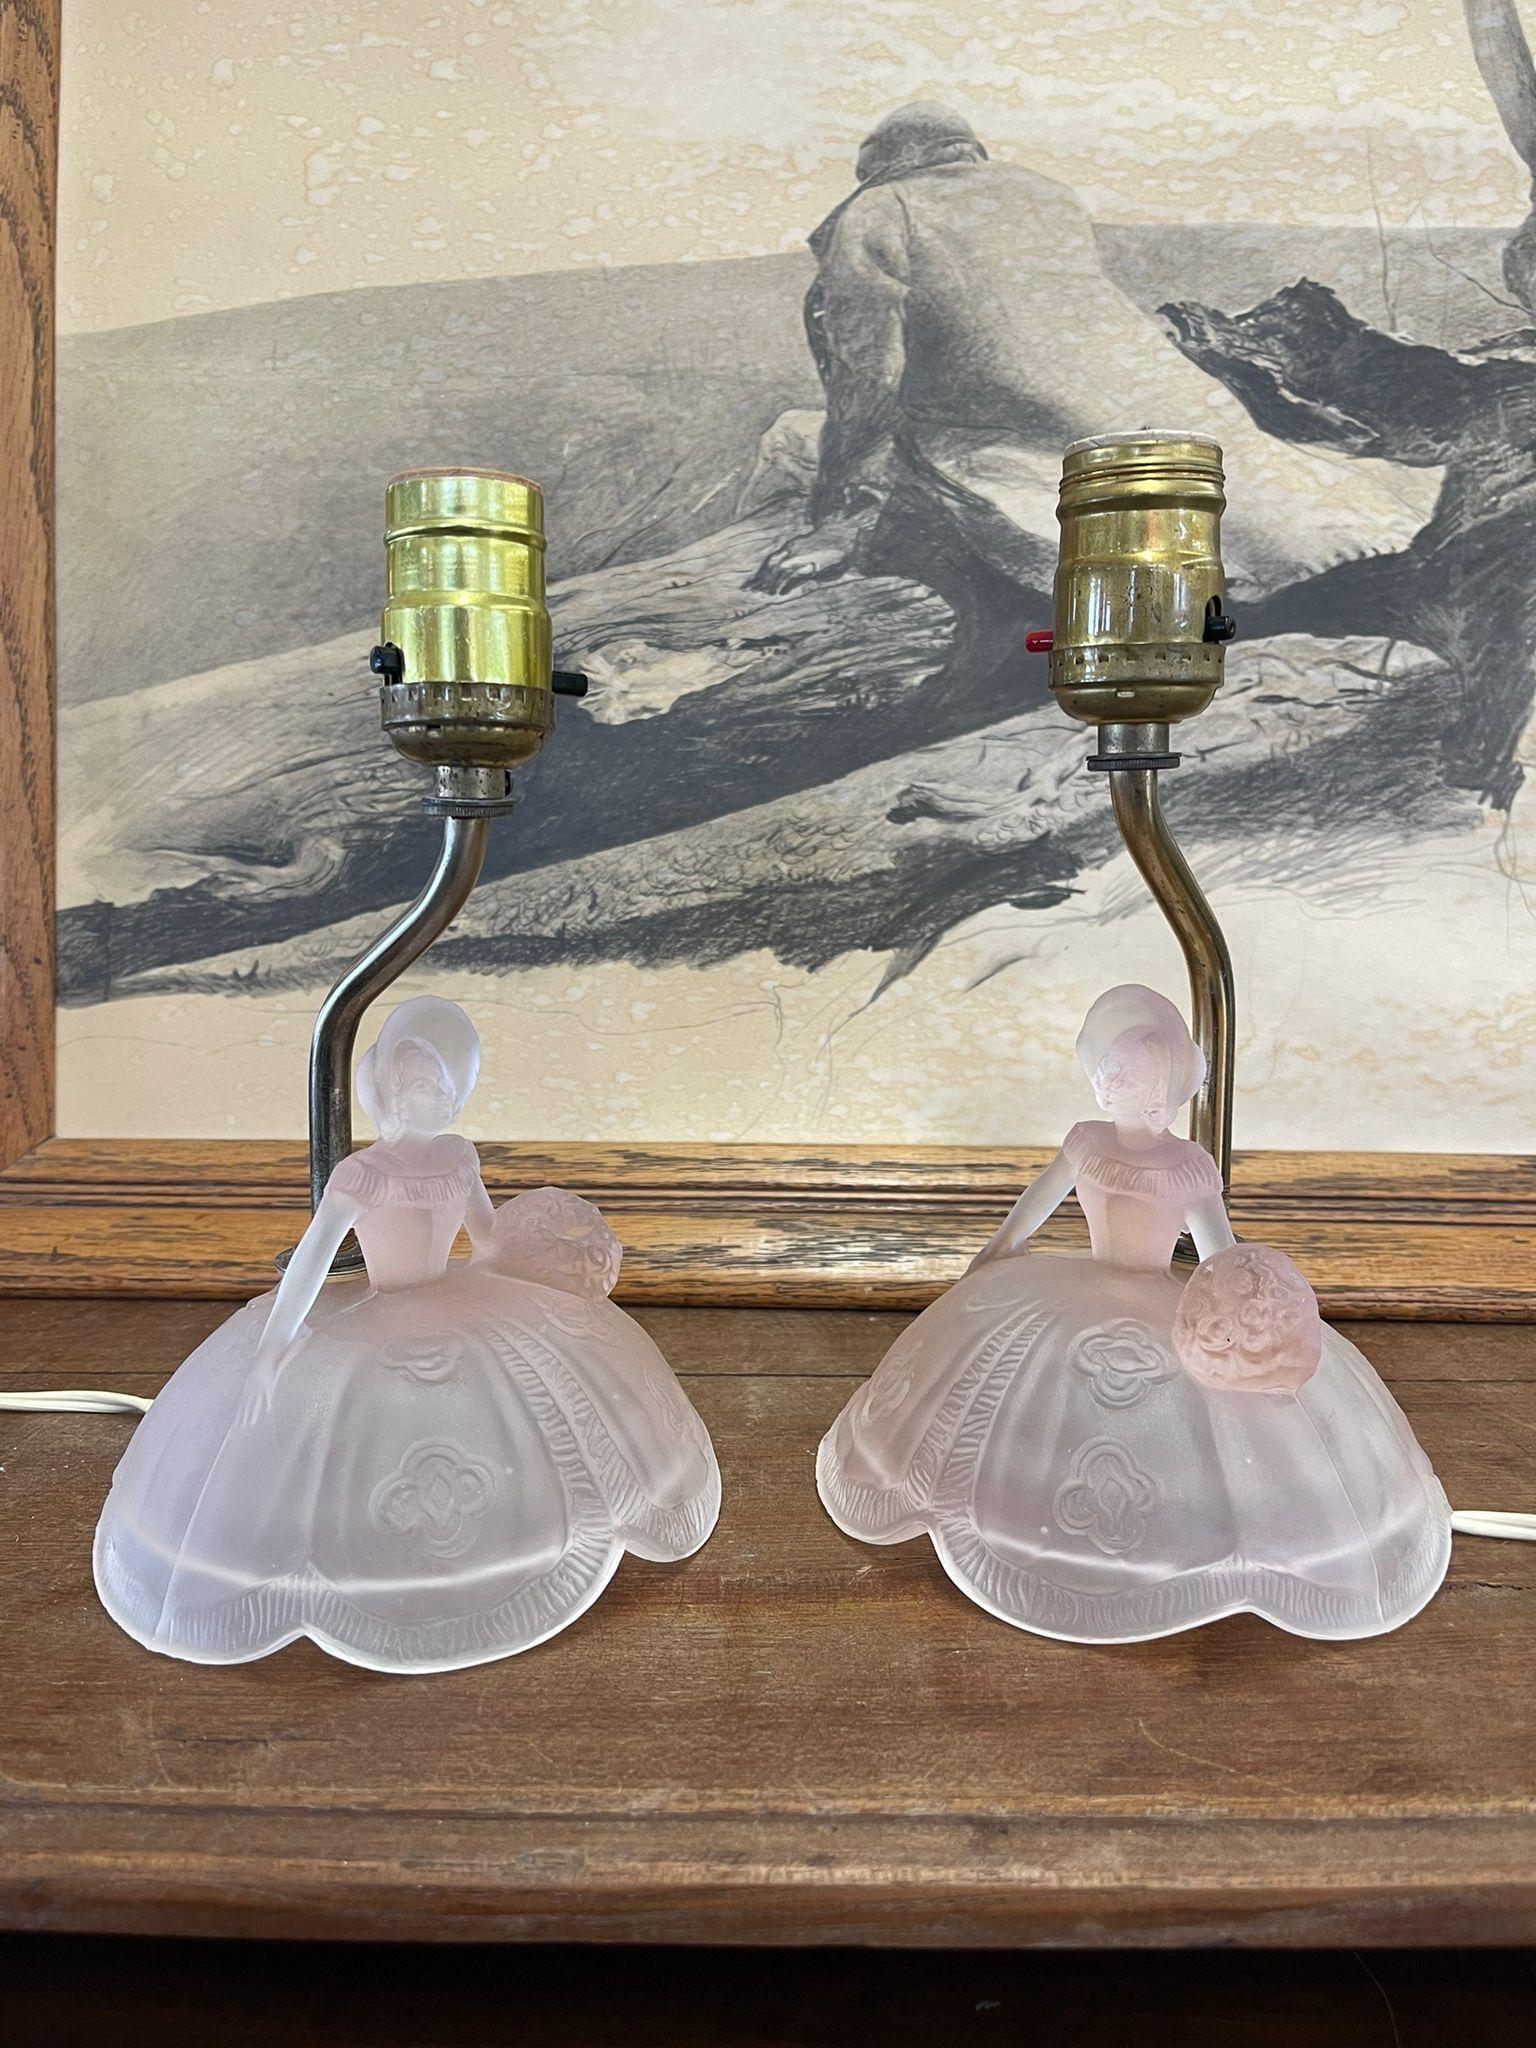 These Lamps featured southern Belle figurines with bouquet of roses in their Hands. Tested in stores and they are operational. Circa 1940s / 1950s. Vintage Condition Consistent with Age as Pictured.

Dimensions. 6 Diameter ; 9 H